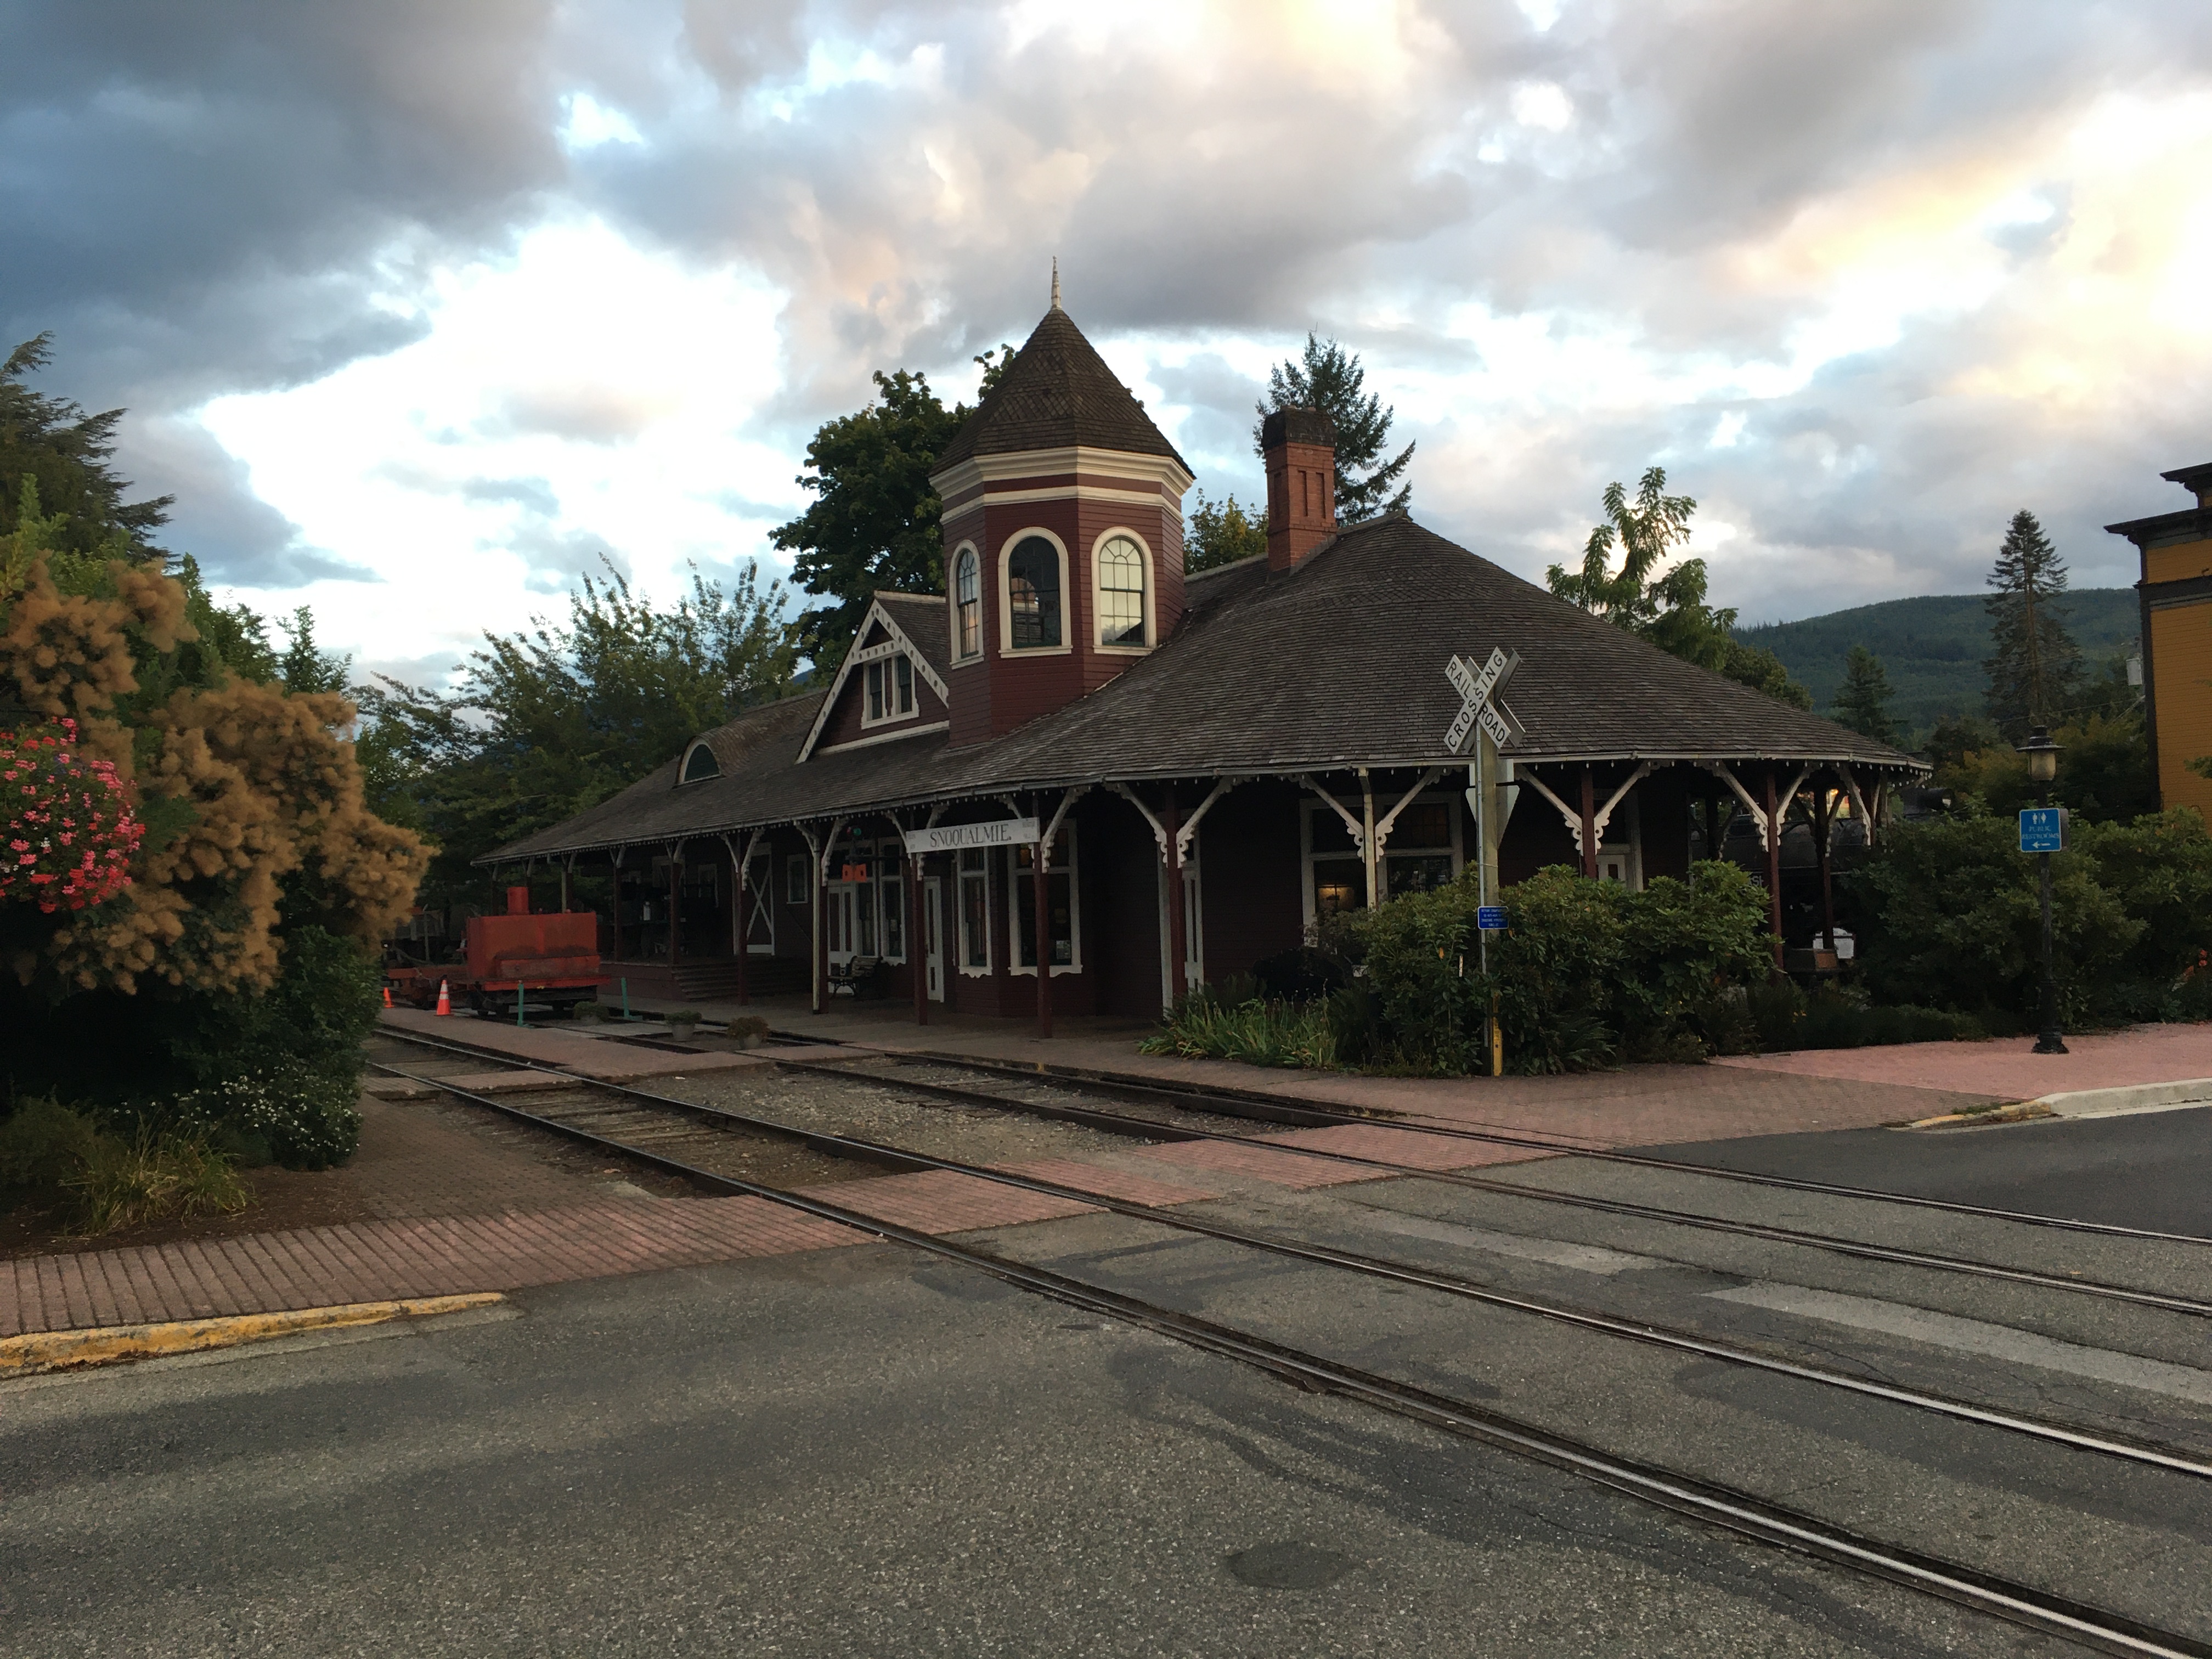 A large, old-fashioned wooden train station